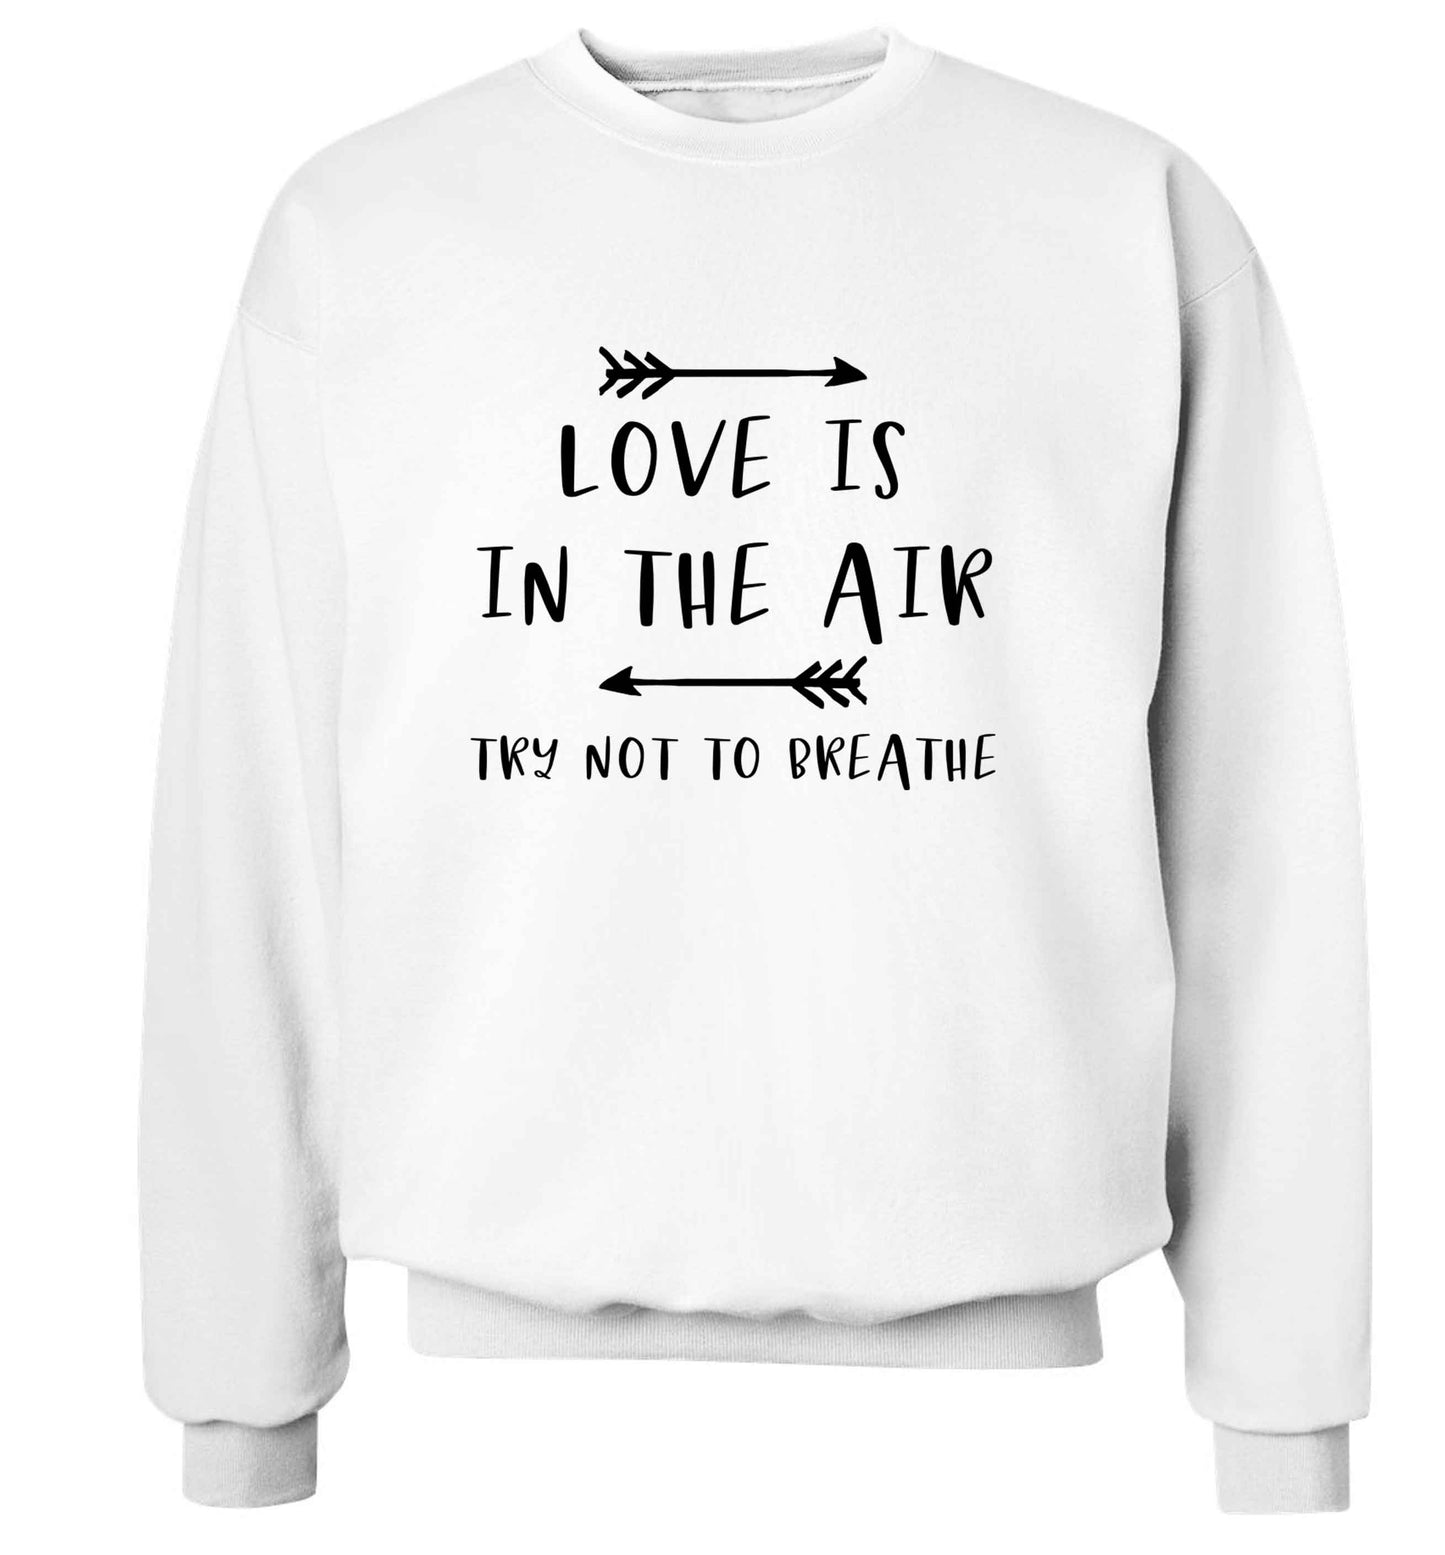 Love is in the air try not to breathe adult's unisex white sweater 2XL